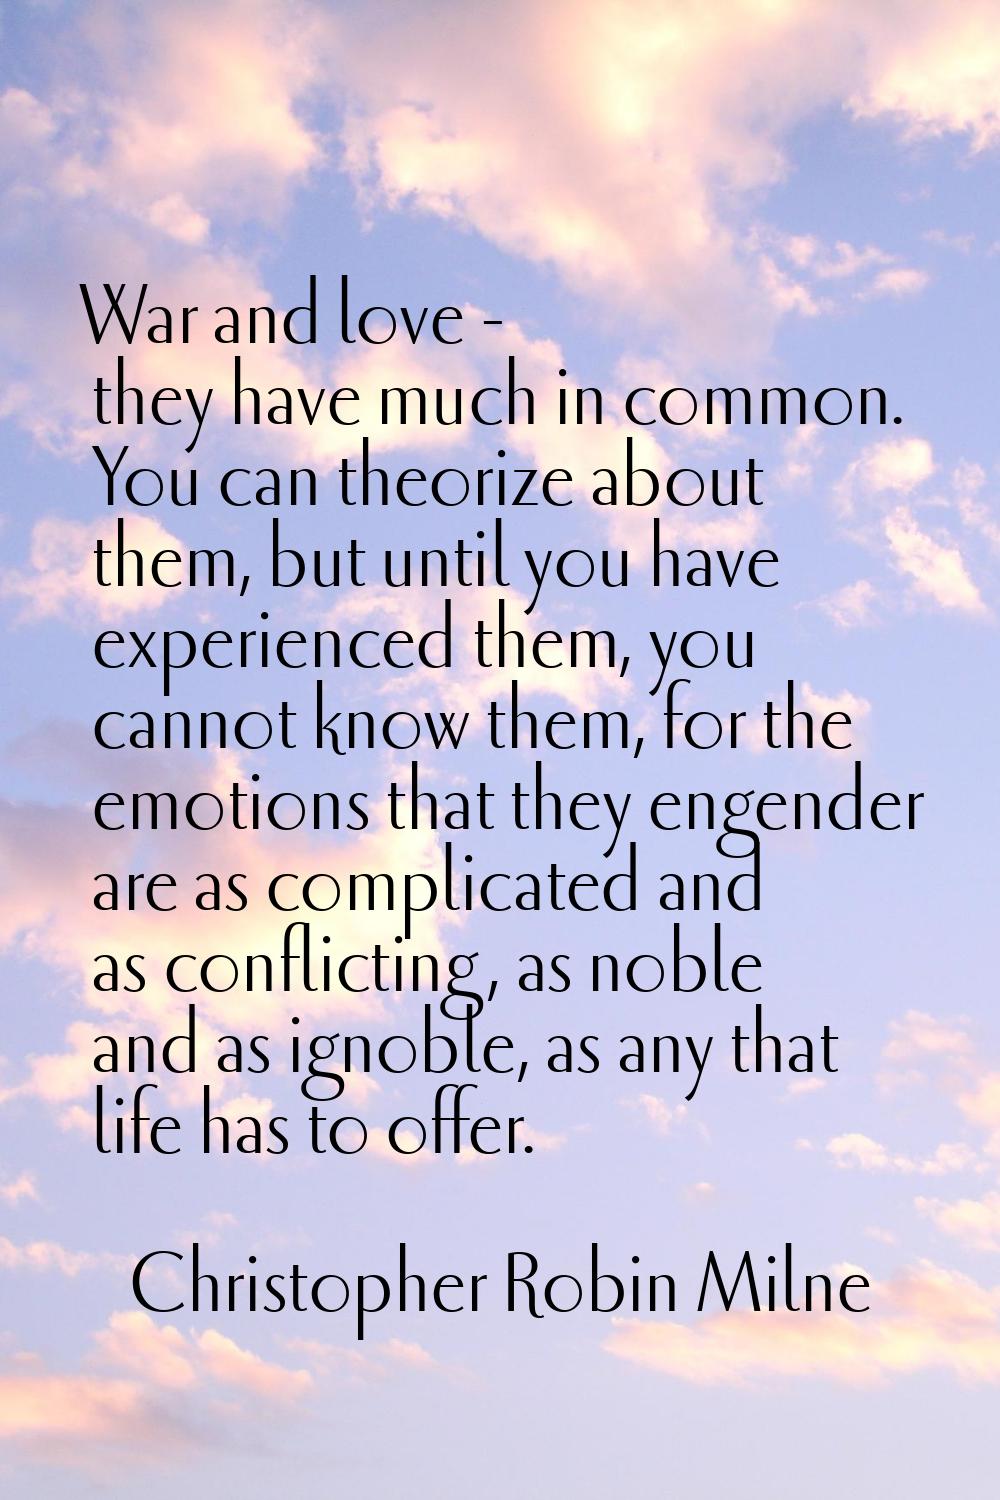 War and love - they have much in common. You can theorize about them, but until you have experience